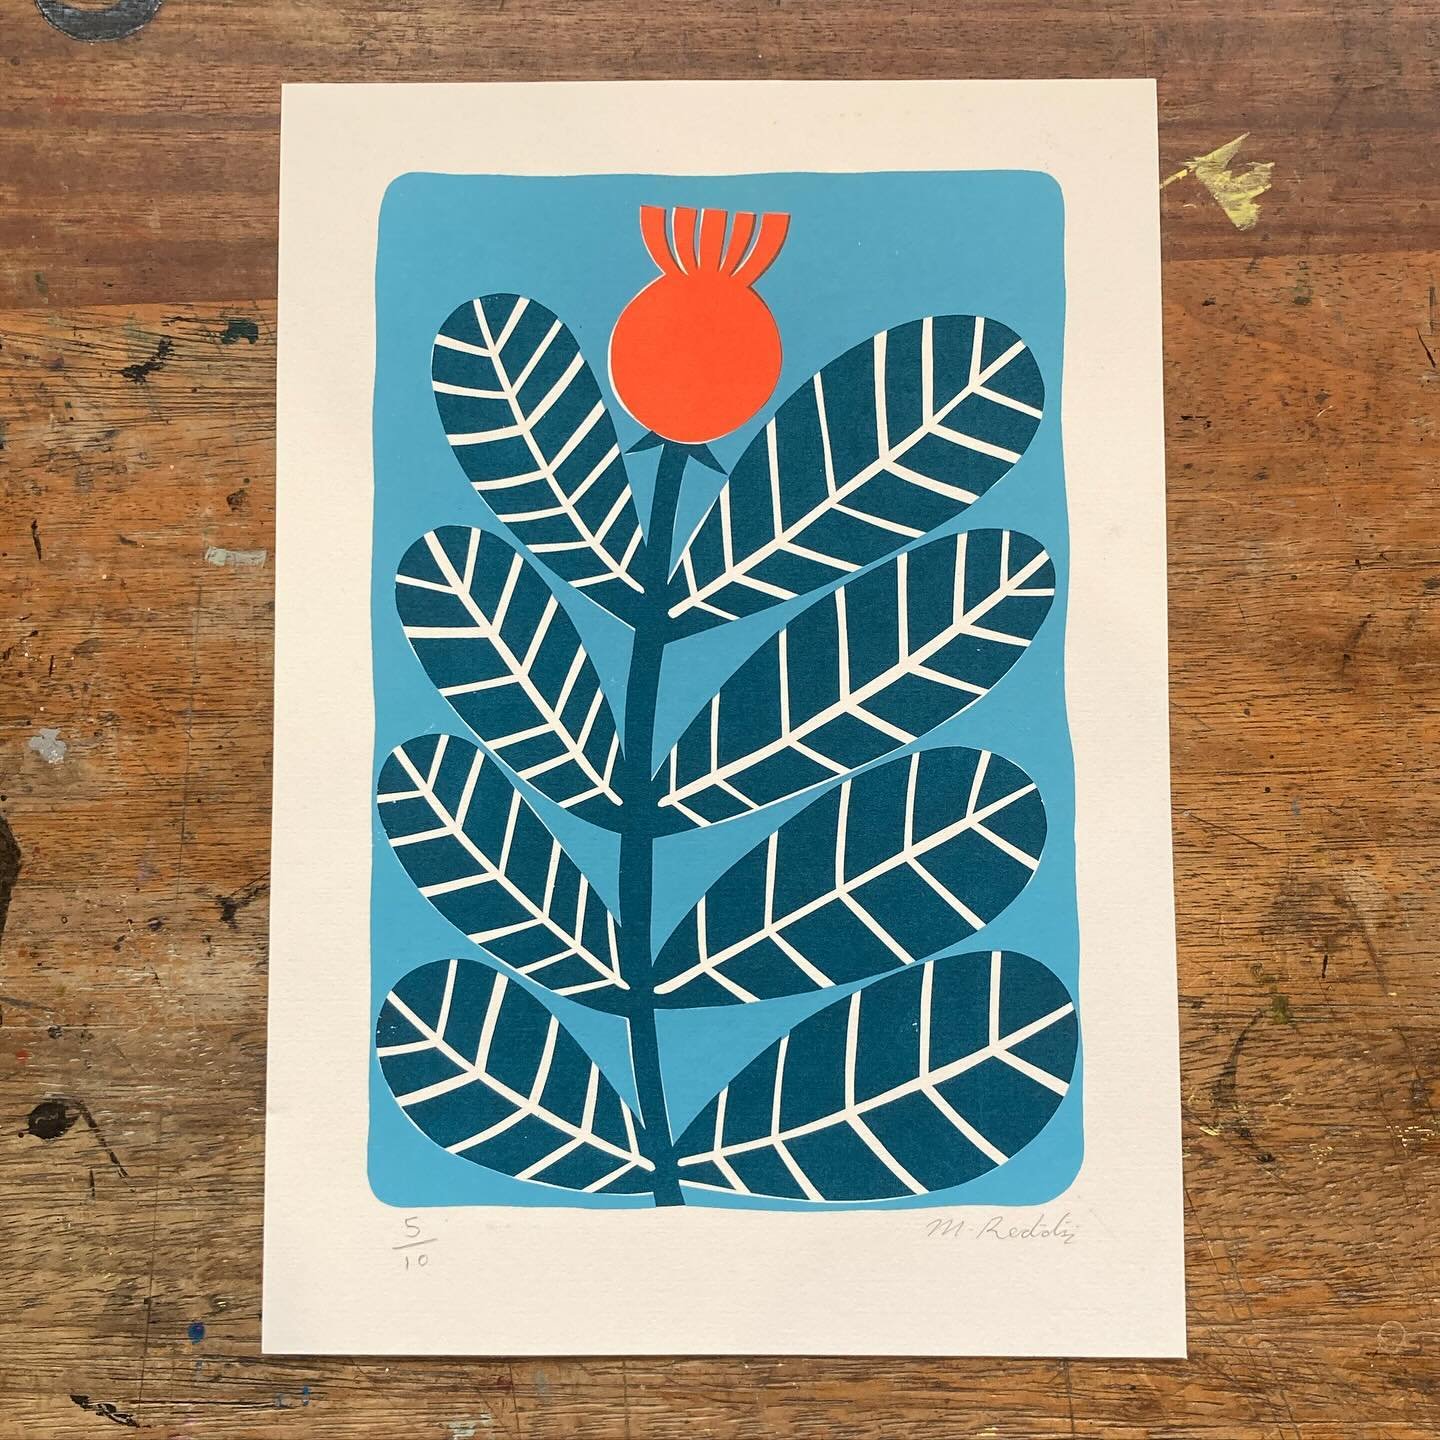 Hello pals! After a very long hiatus, my website is back online and with it, comes a brand new print shop! After much deliberation, I have made the decision to only sell editioned, prints that I have made myself with traditional printmaking technique